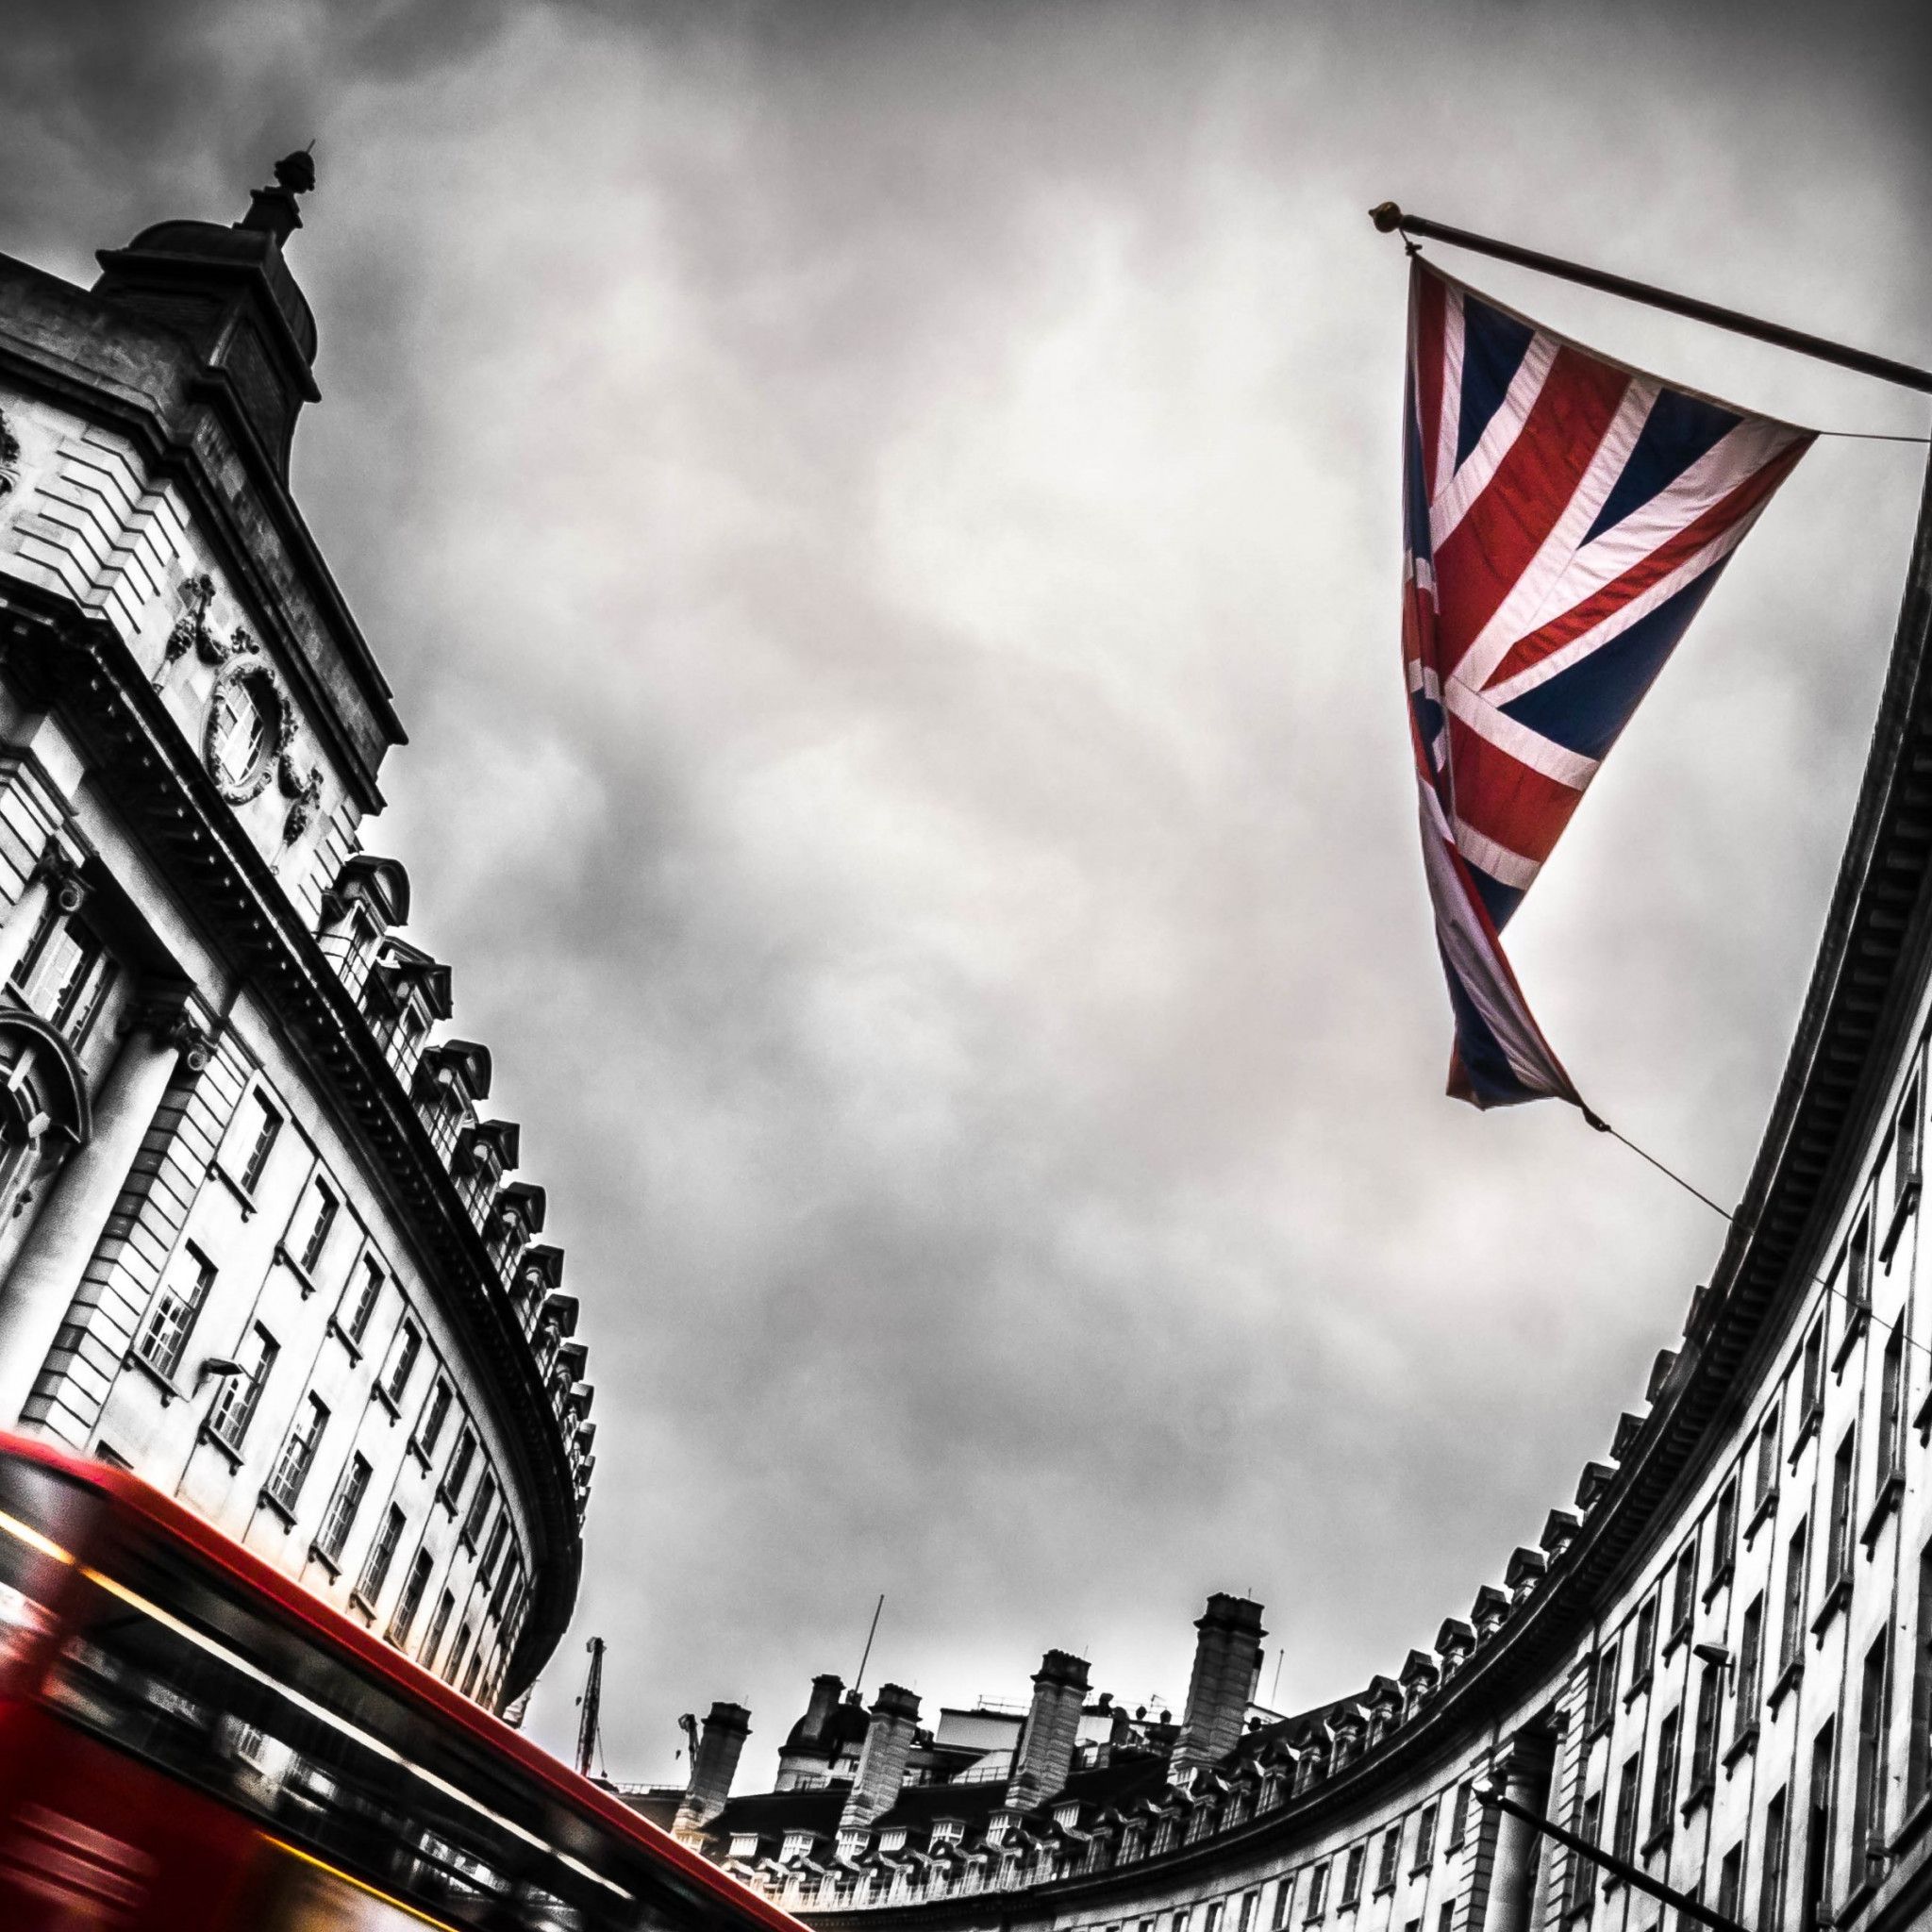 Download wallpaper: London bus and England flag 2048x2048